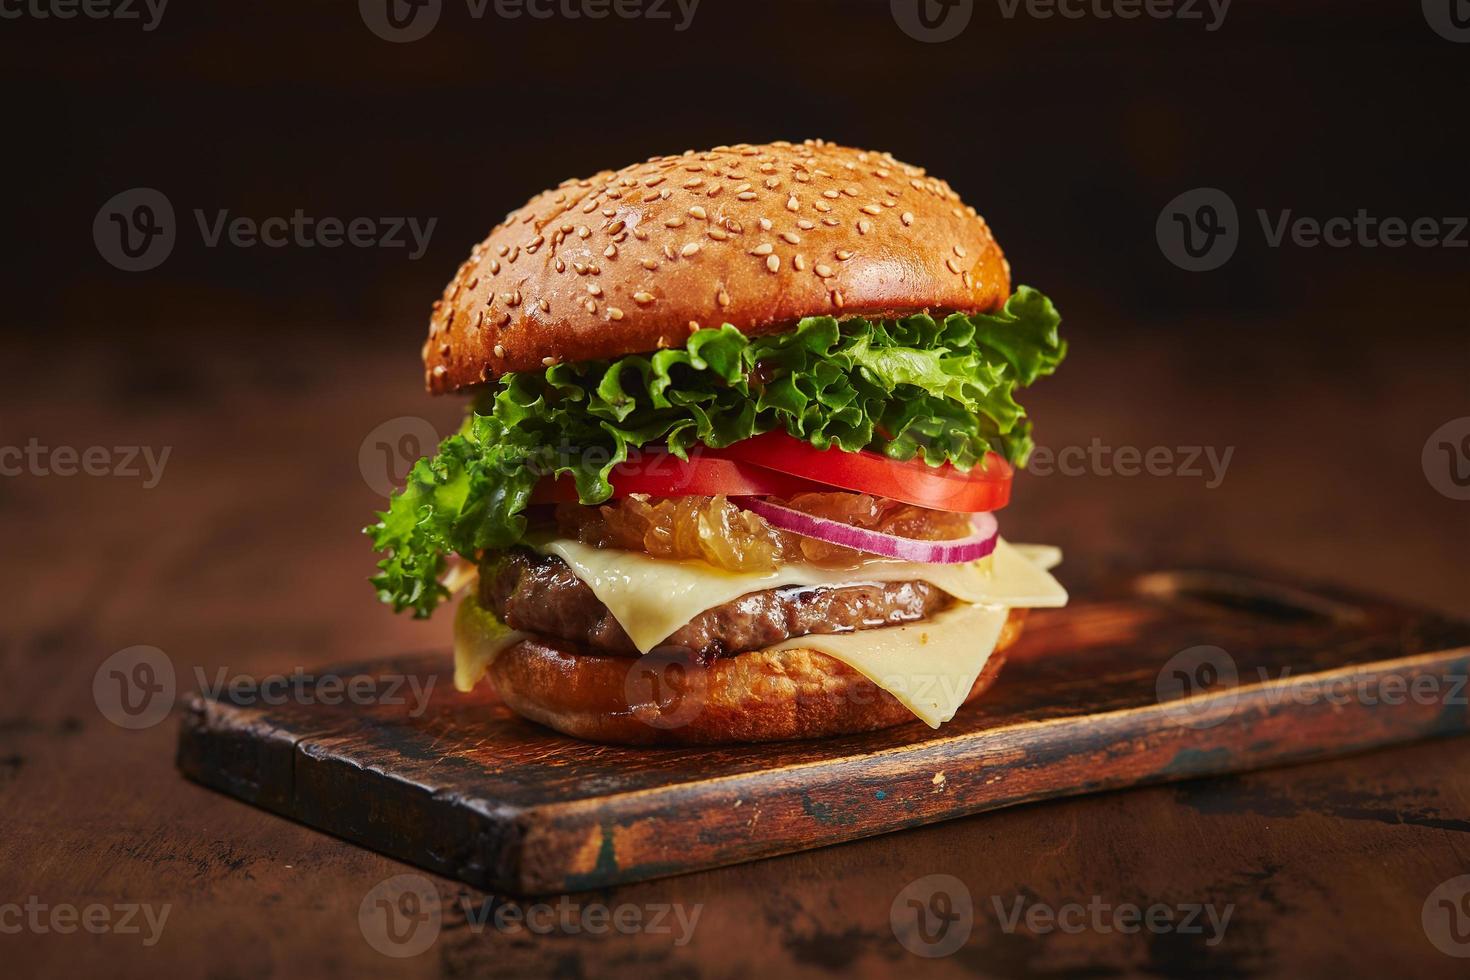 Homemade burger with beef, cheese and onion marmalade on a wooden board. Fast food concept, american food photo